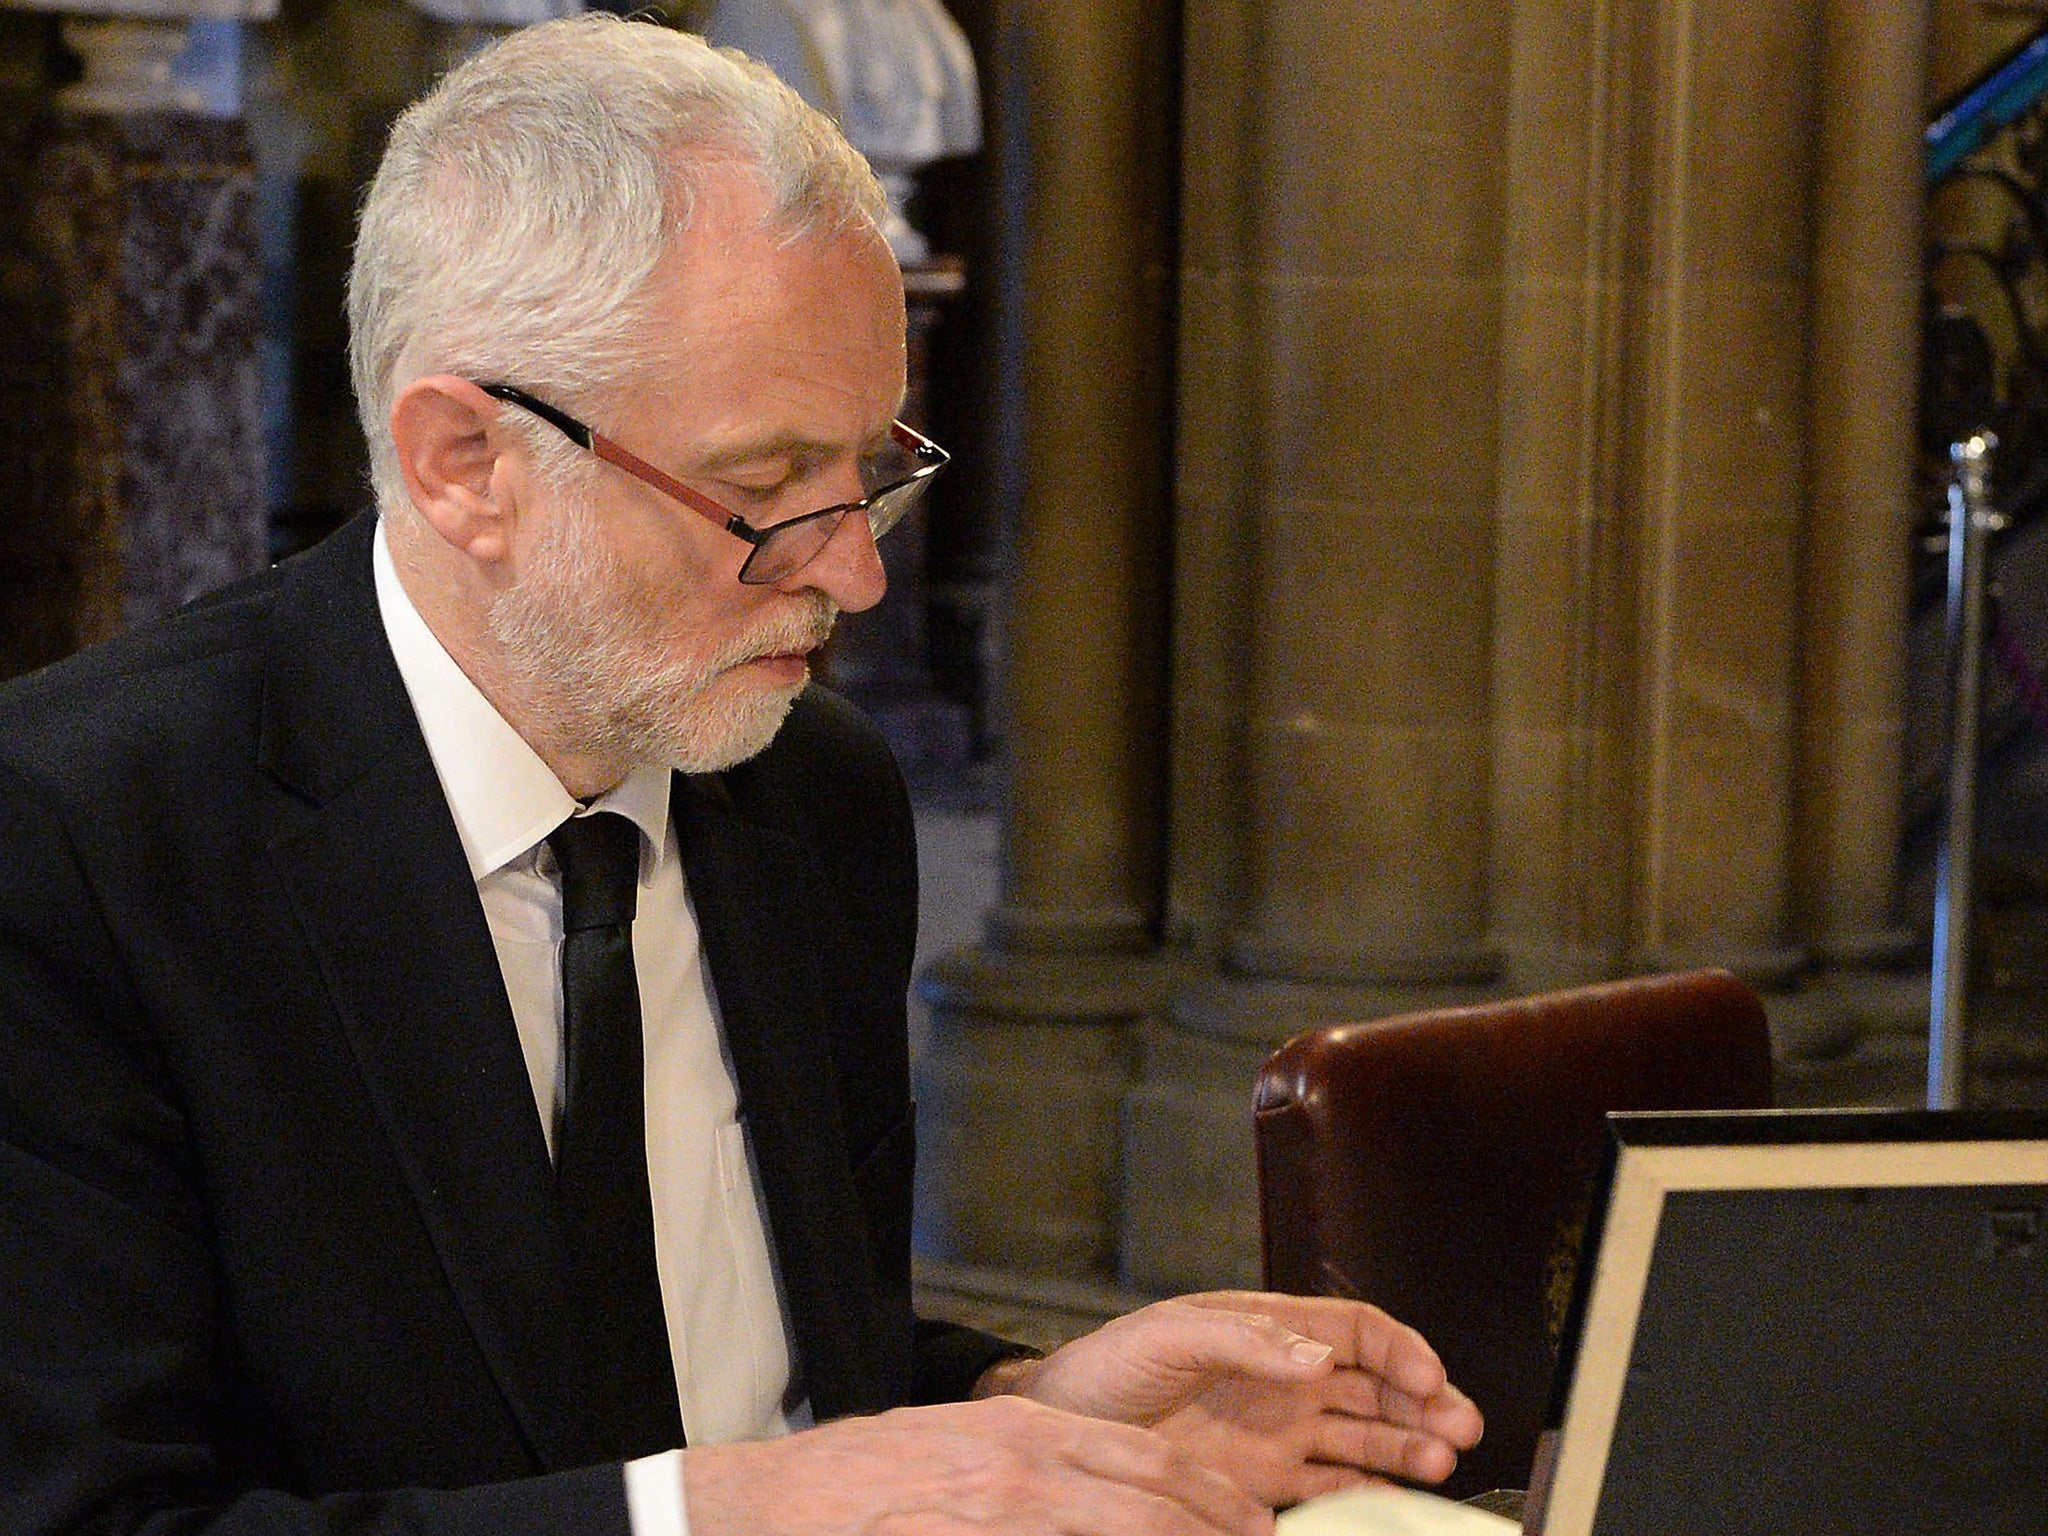 Jeremy Corbyn signs a book of condolences in Manchester following the attack at an Ariana Grande concert